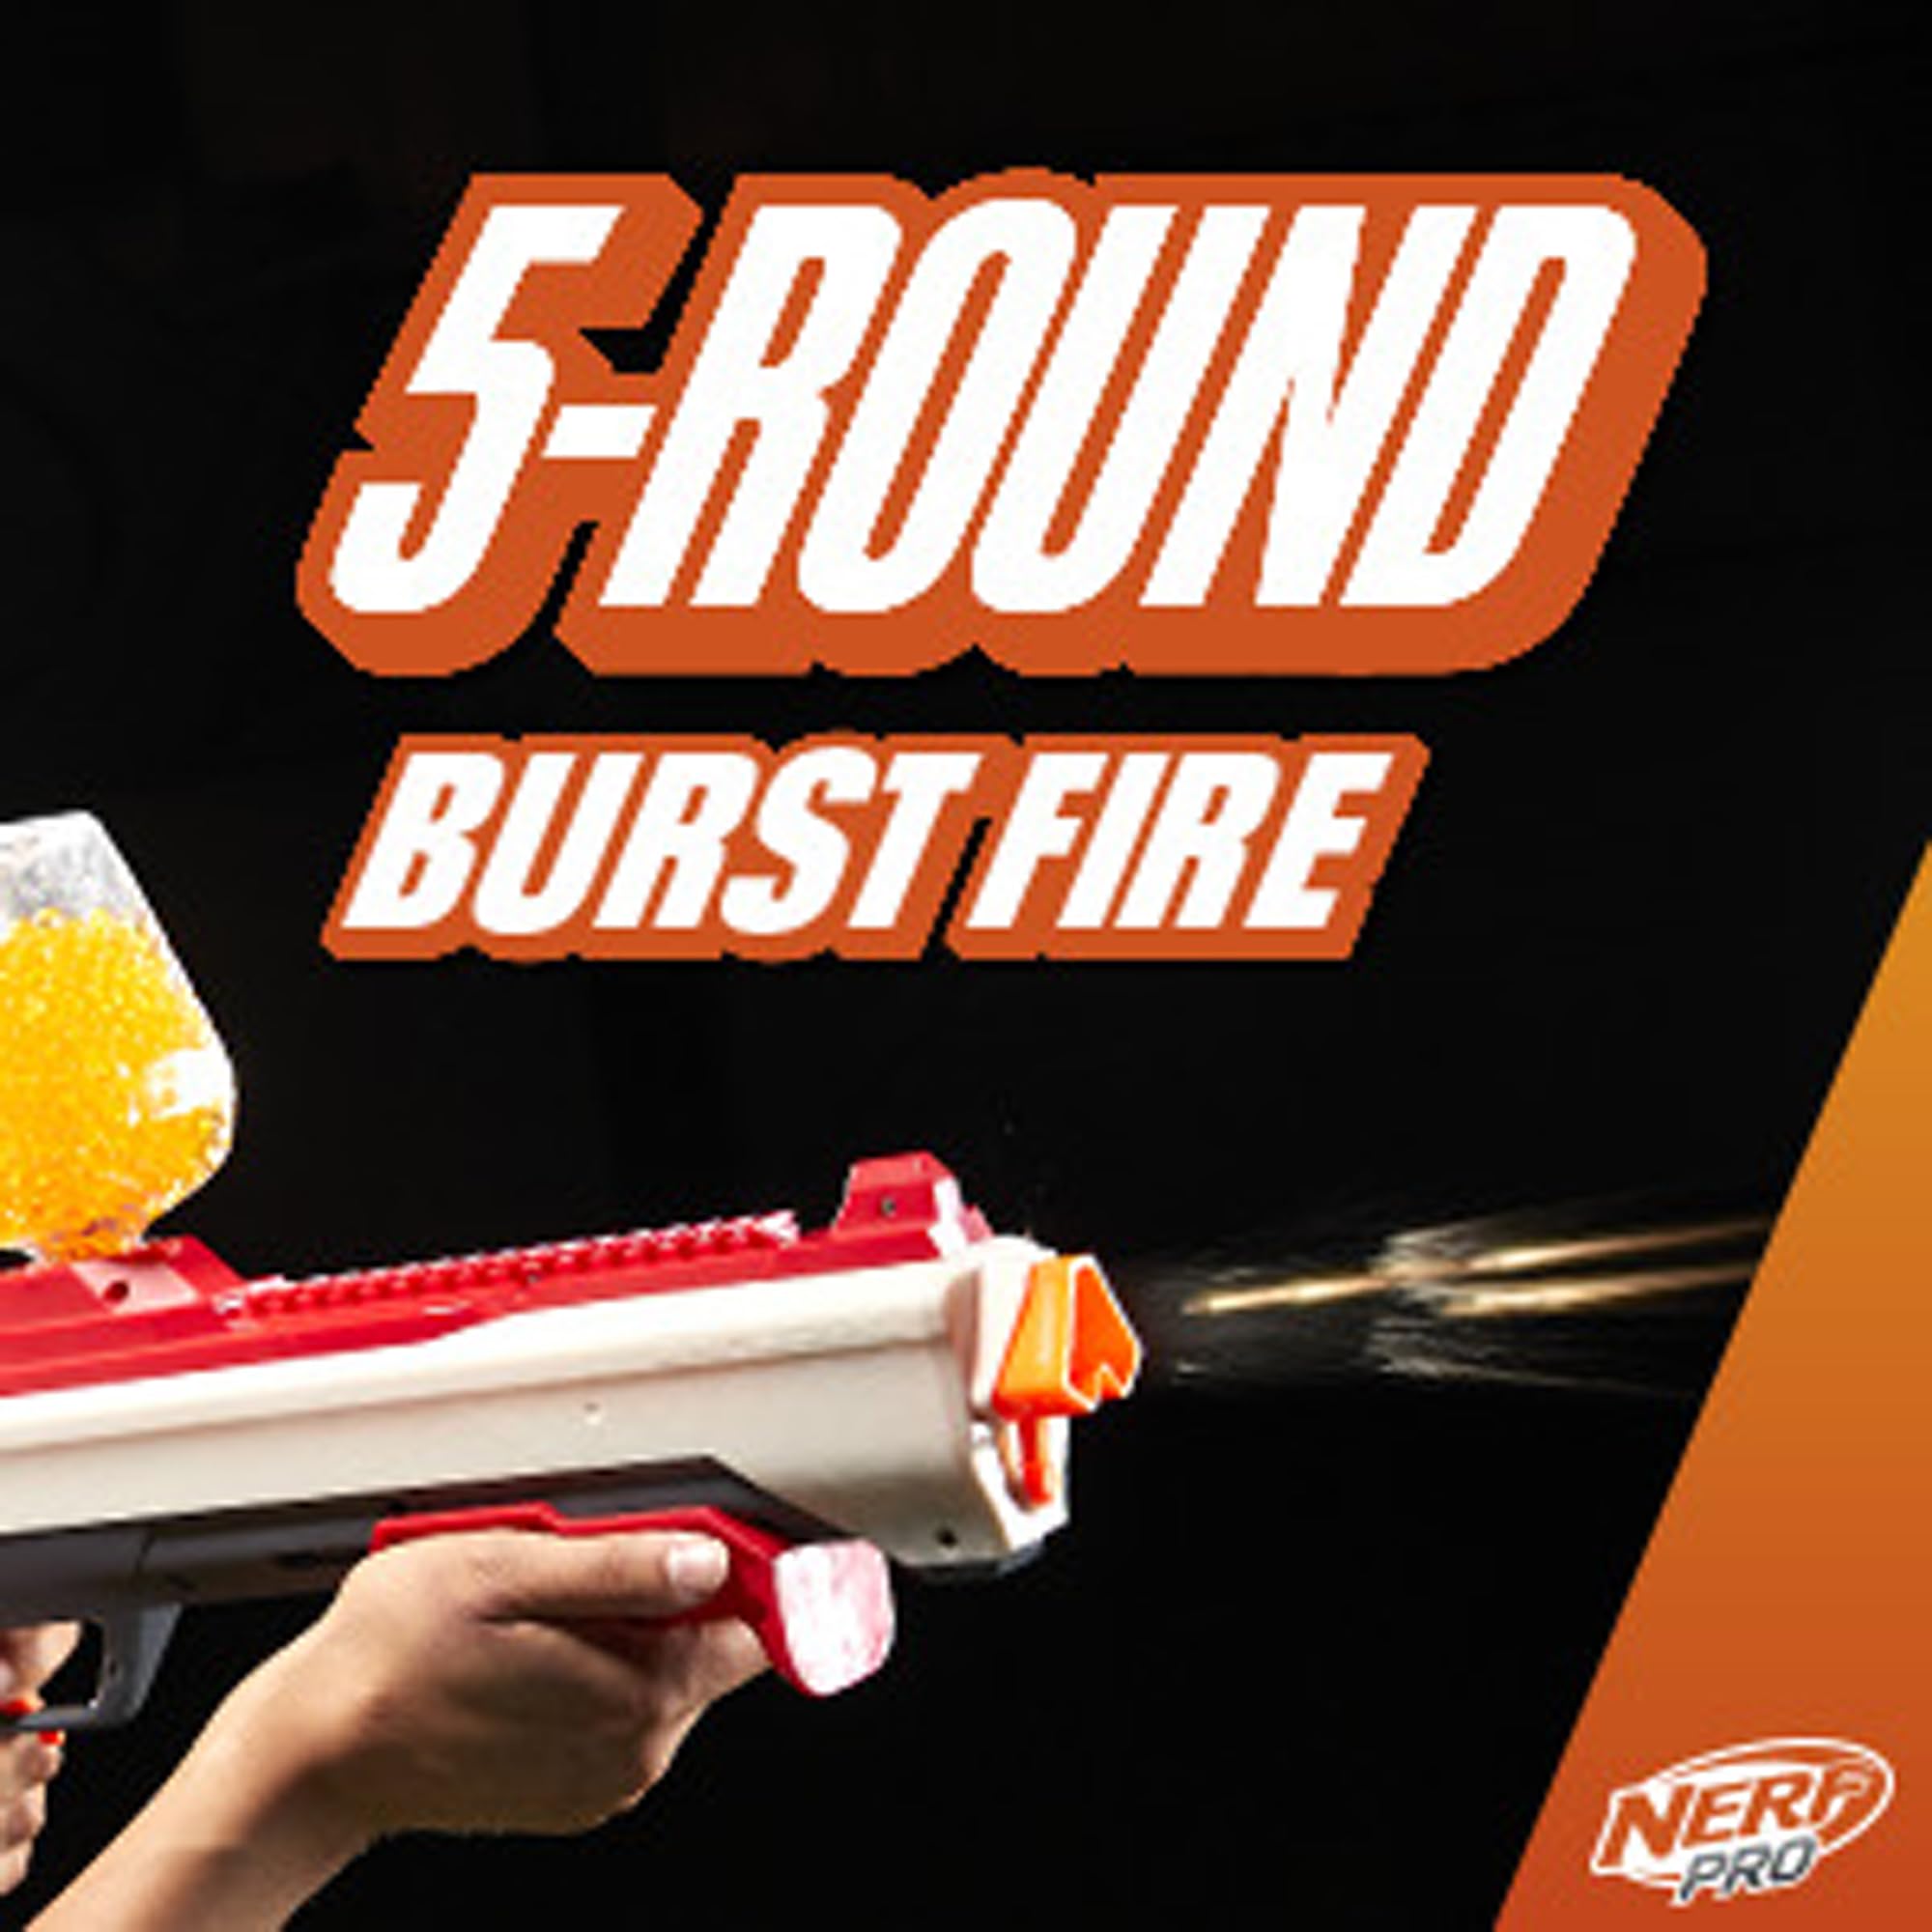 Nerf Pro Gelfire Raid Blaster, Fire 5 Rounds at Once, 10,000 Gel Rounds, 800 Round Hopper, Eyewear, Toys for Teens Ages 14 & Up